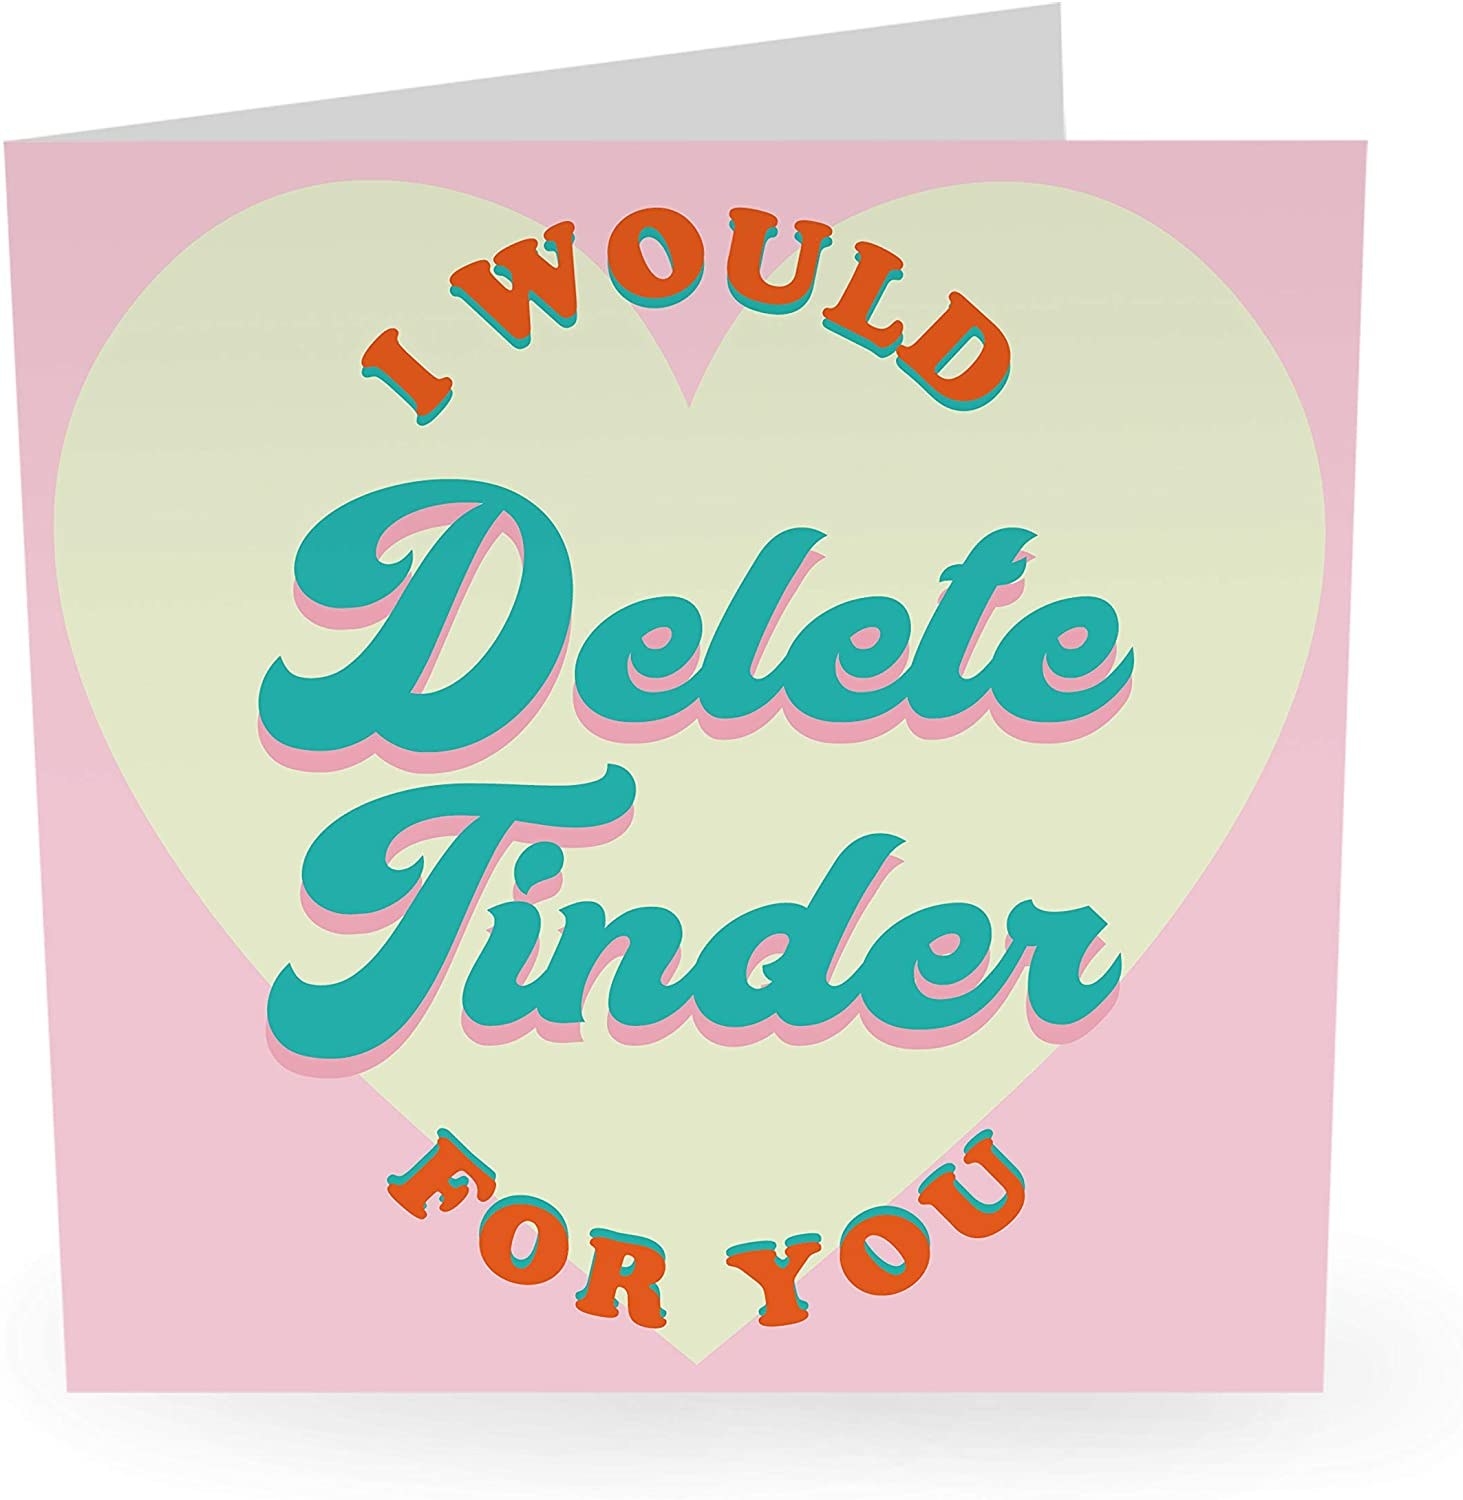 A pink card with an off-white heart and the words &quot;I&#x27;d delete Tinder for you&quot;